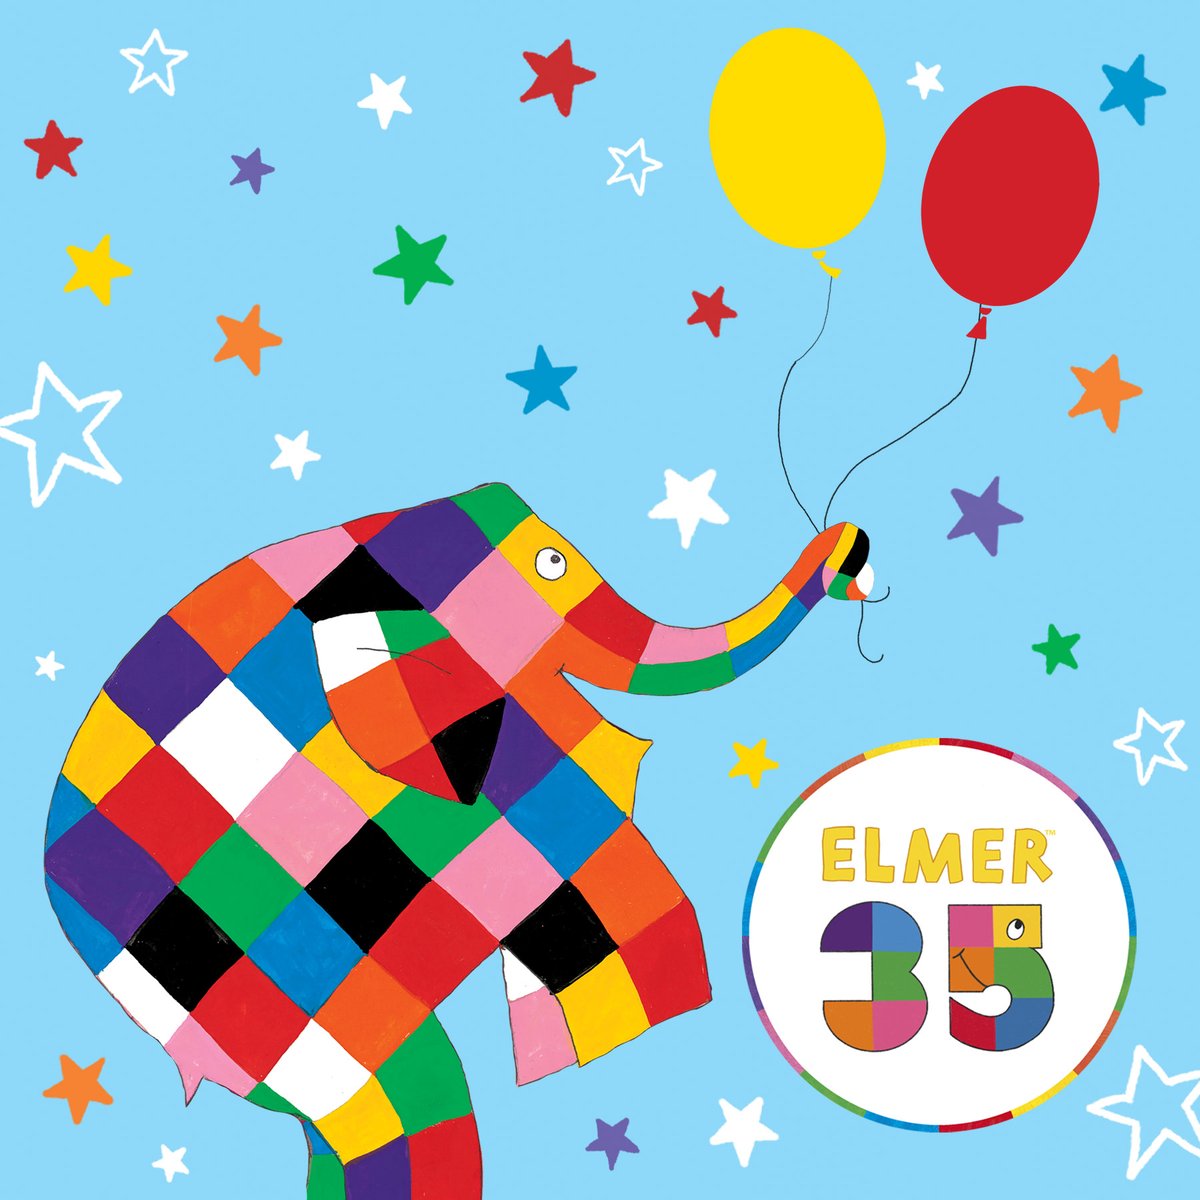 Get ready for the most colourful day of the year! #ElmerDay is back on 25th May and this year will be an extra special celebration for Elmer’s 35th birthday! 🌈🐘 Join in the fun by downloading the FREE Elmer Day celebration pack: elmer.co.uk/elmer-day/